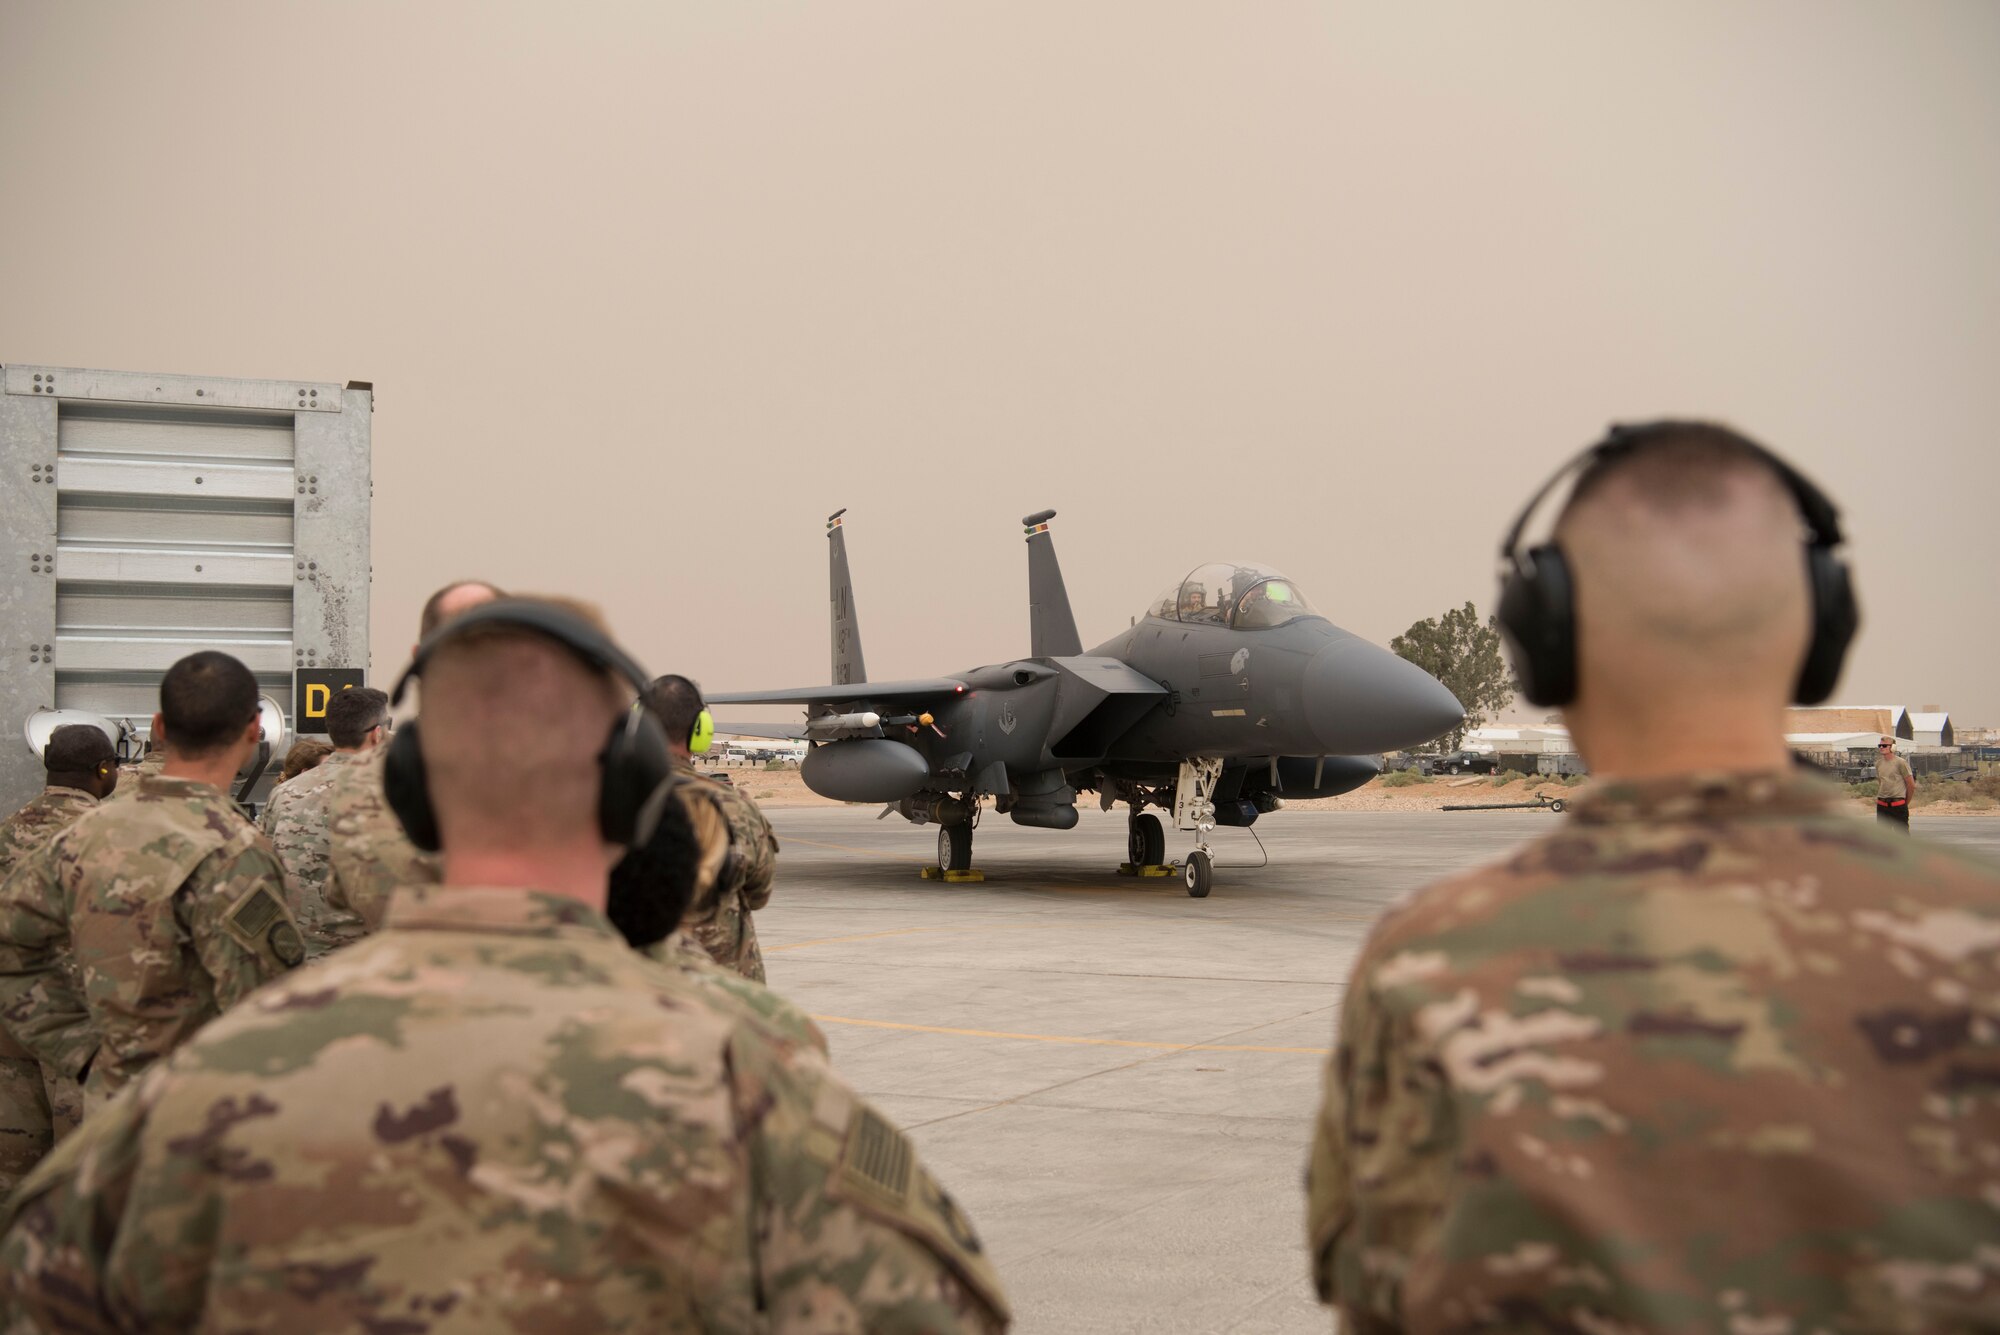 Airmen with the 332nd Air Expeditionary Wing wait for Col. Shane Steinke, 332nd AEW vice commander, to disembark to congratulate him after completing his final flight May 7, 2018, at an undisclosed location in Southwest Asia